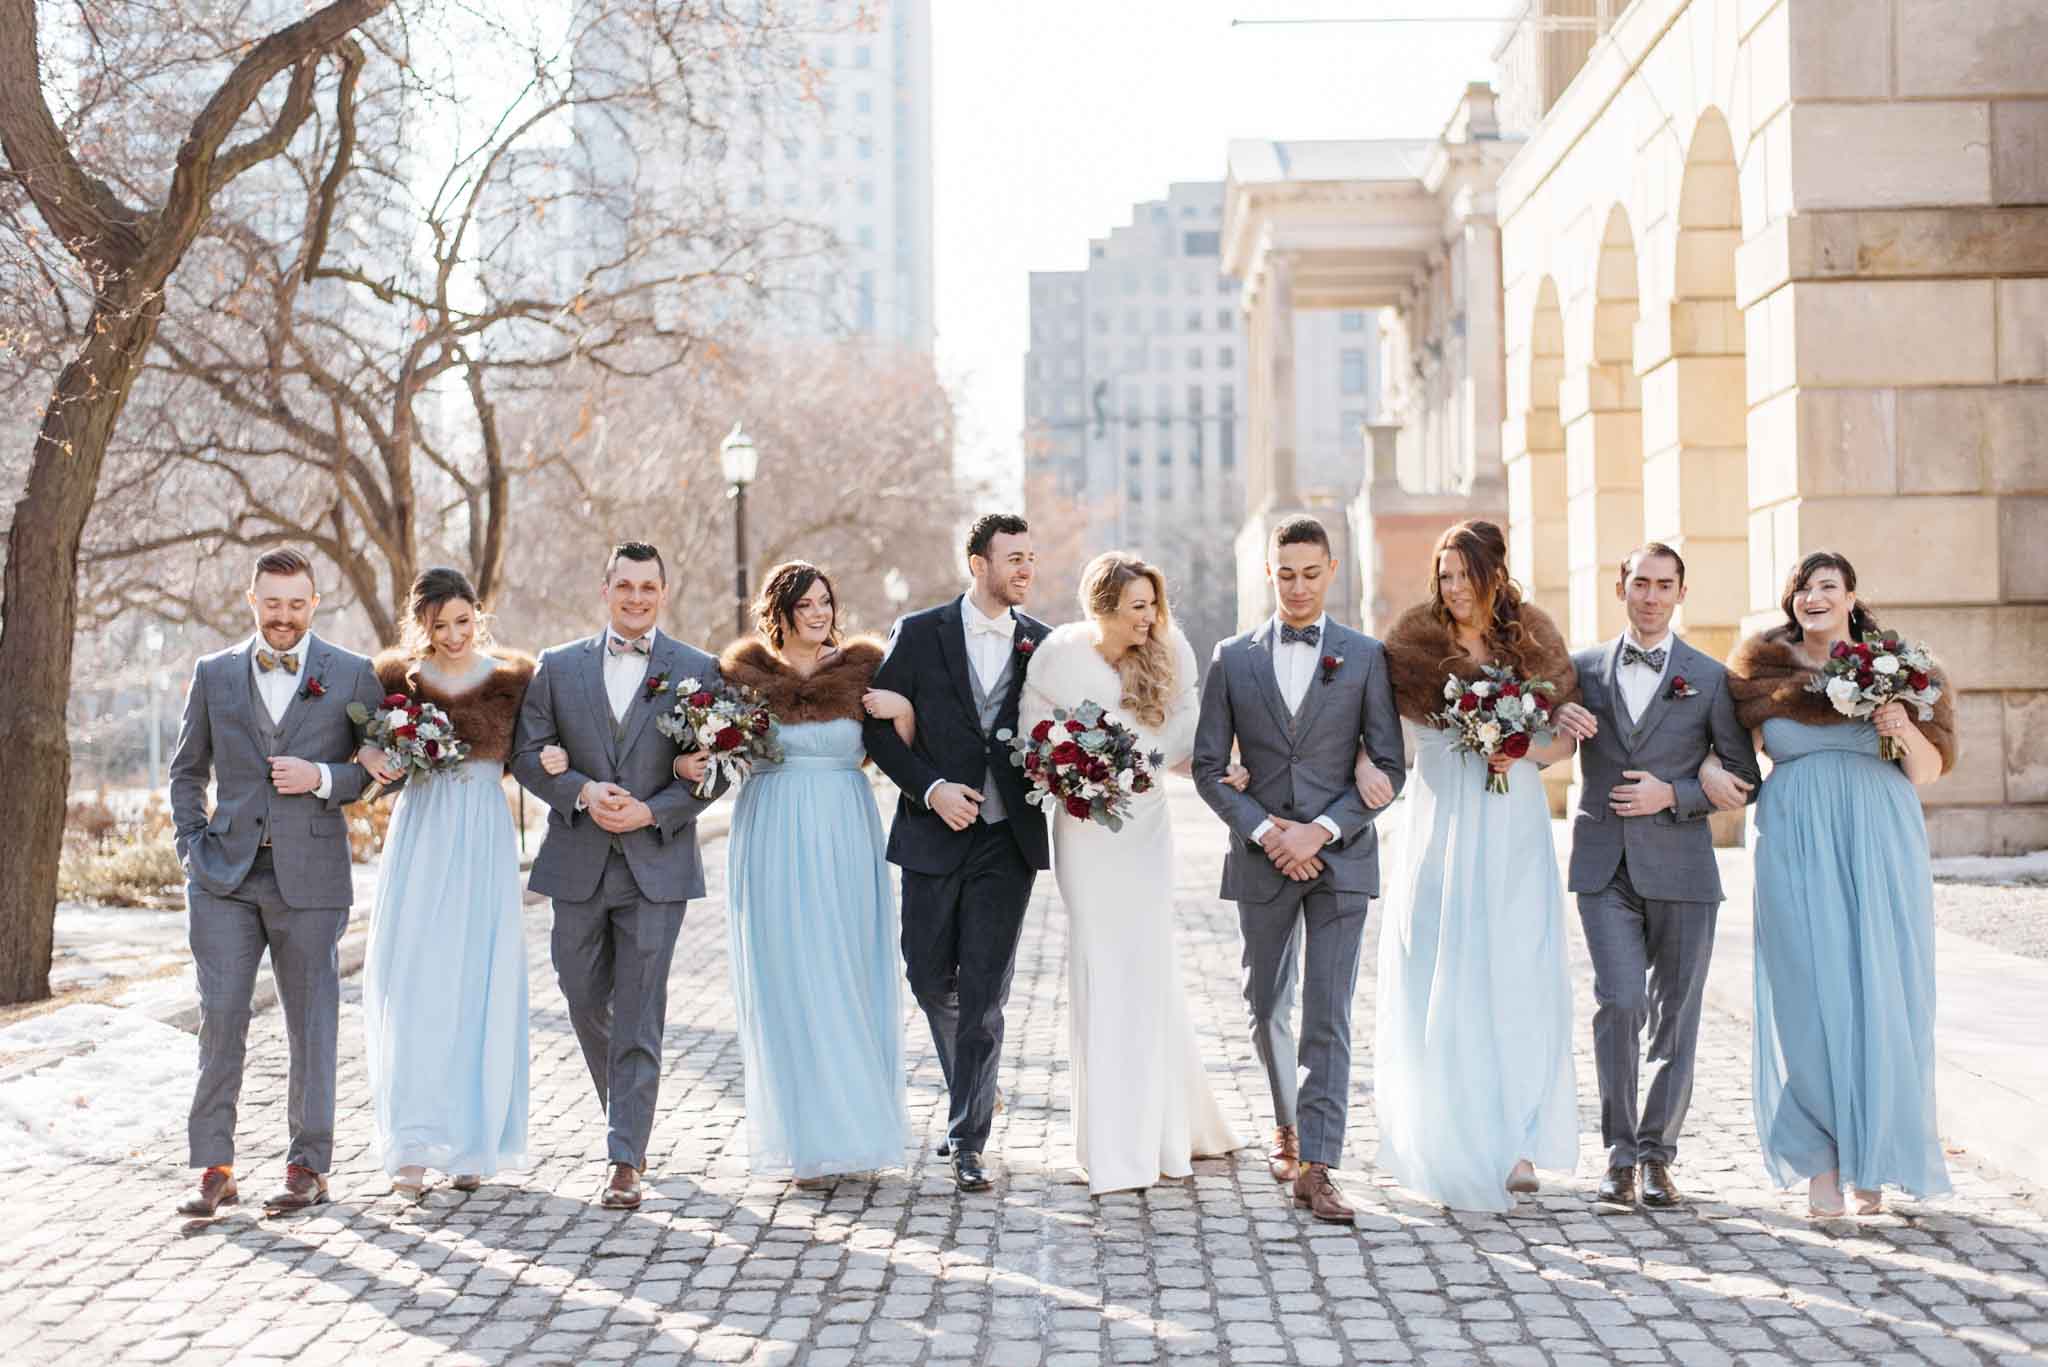 Winter Wedding Party Photos with Fur Stole | Olive Photography Toronto